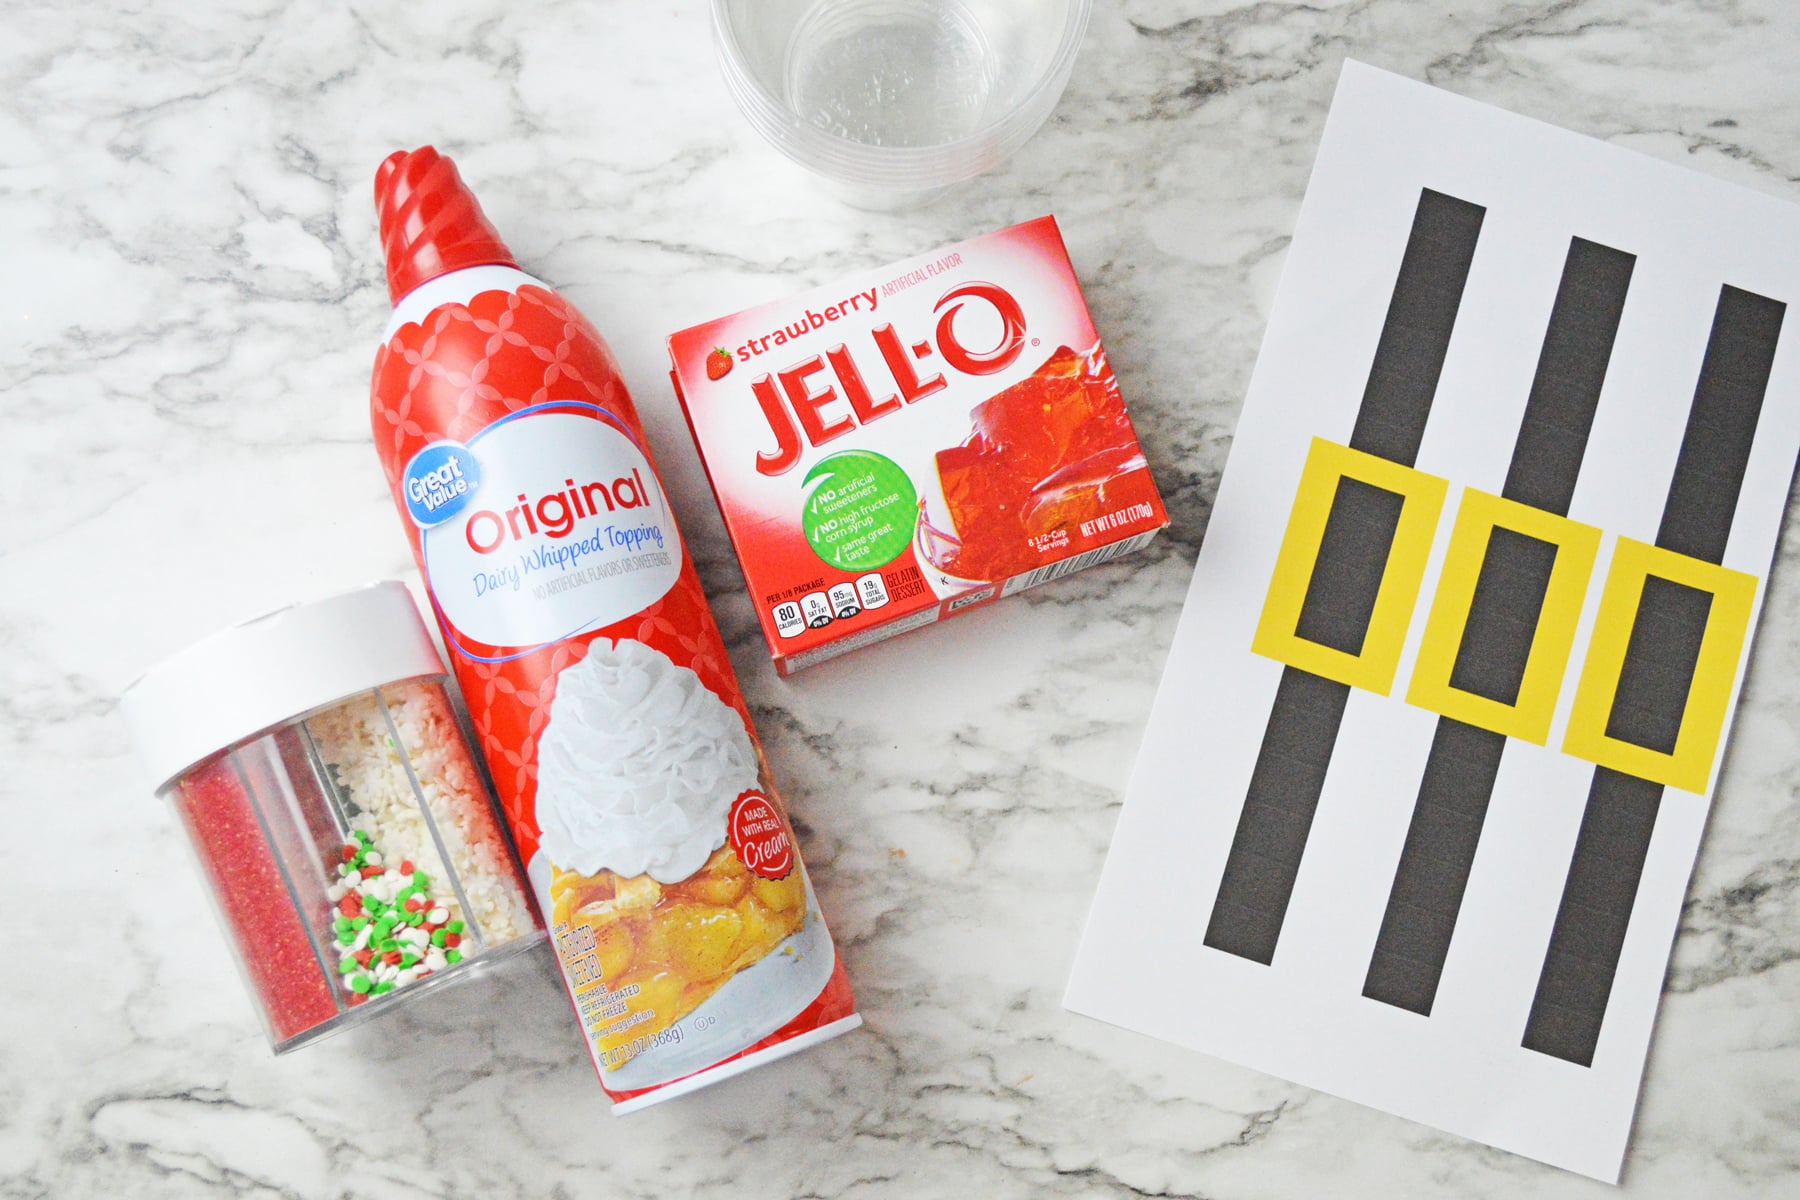 The ingredients for Santa Jello Cups for kids include strawberry jello, water, divided, Santa’s belt printable (printed with belts cut out), scotch tape, whipped cream for topping, Christmas sprinkles for topping (optional), and clear solo cups